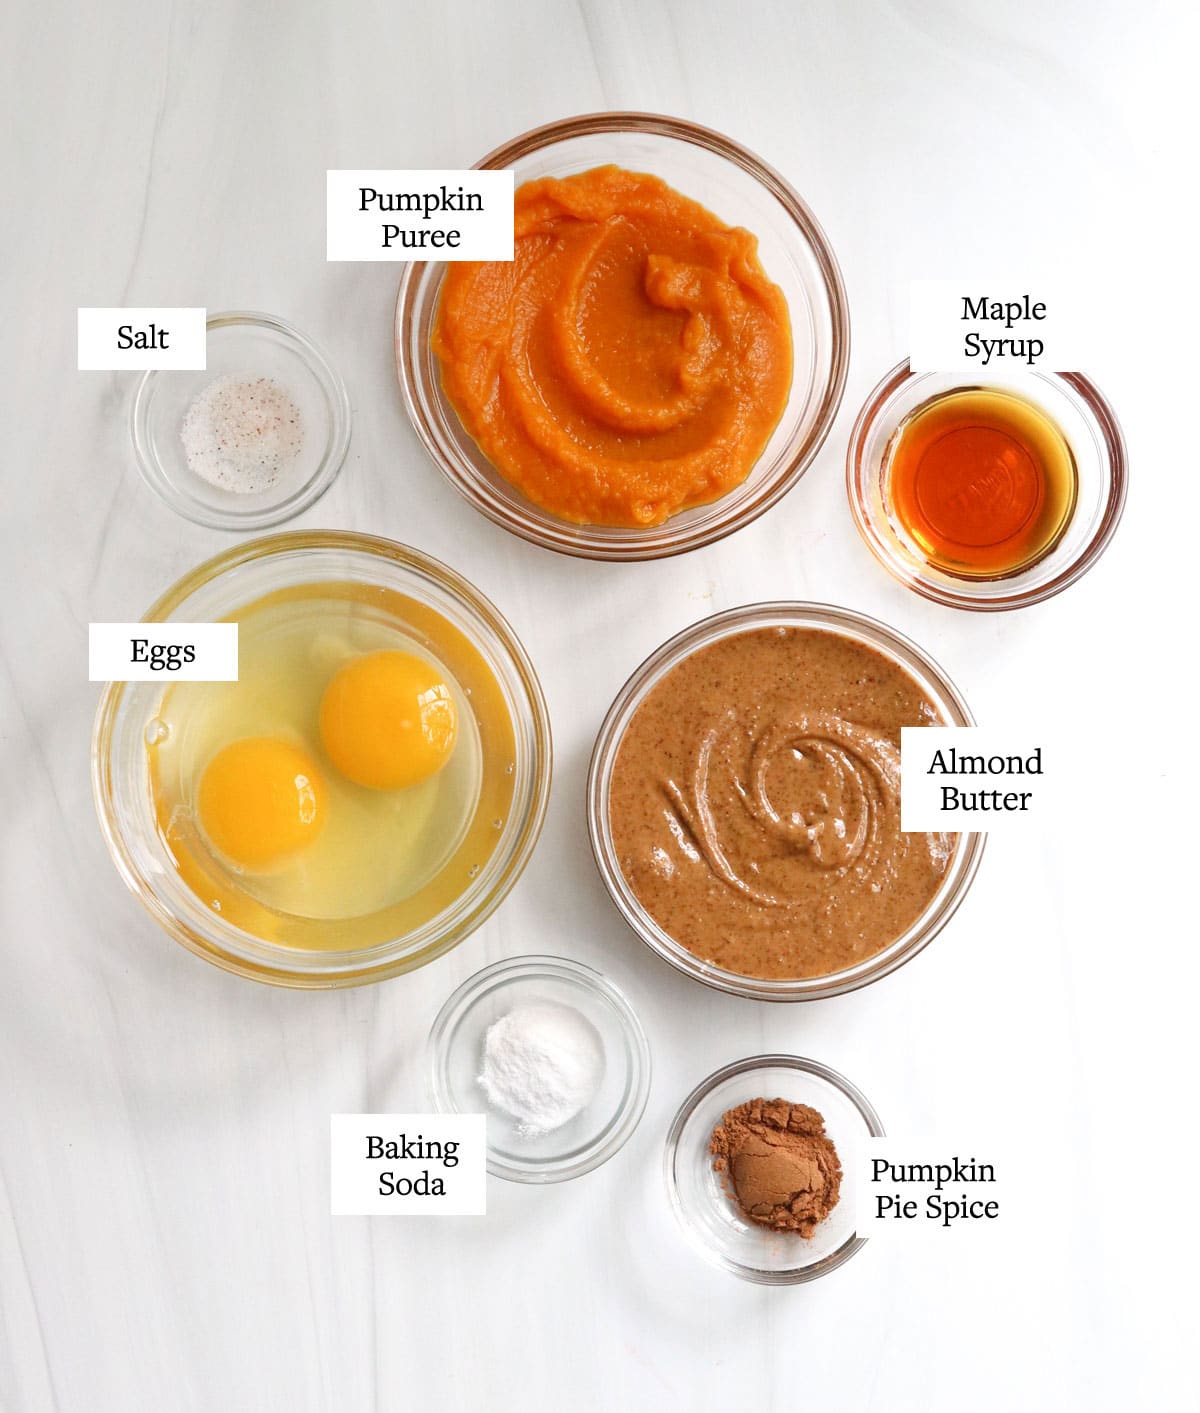 ingredients for pumpkin pancakes in glass bowls on white surface